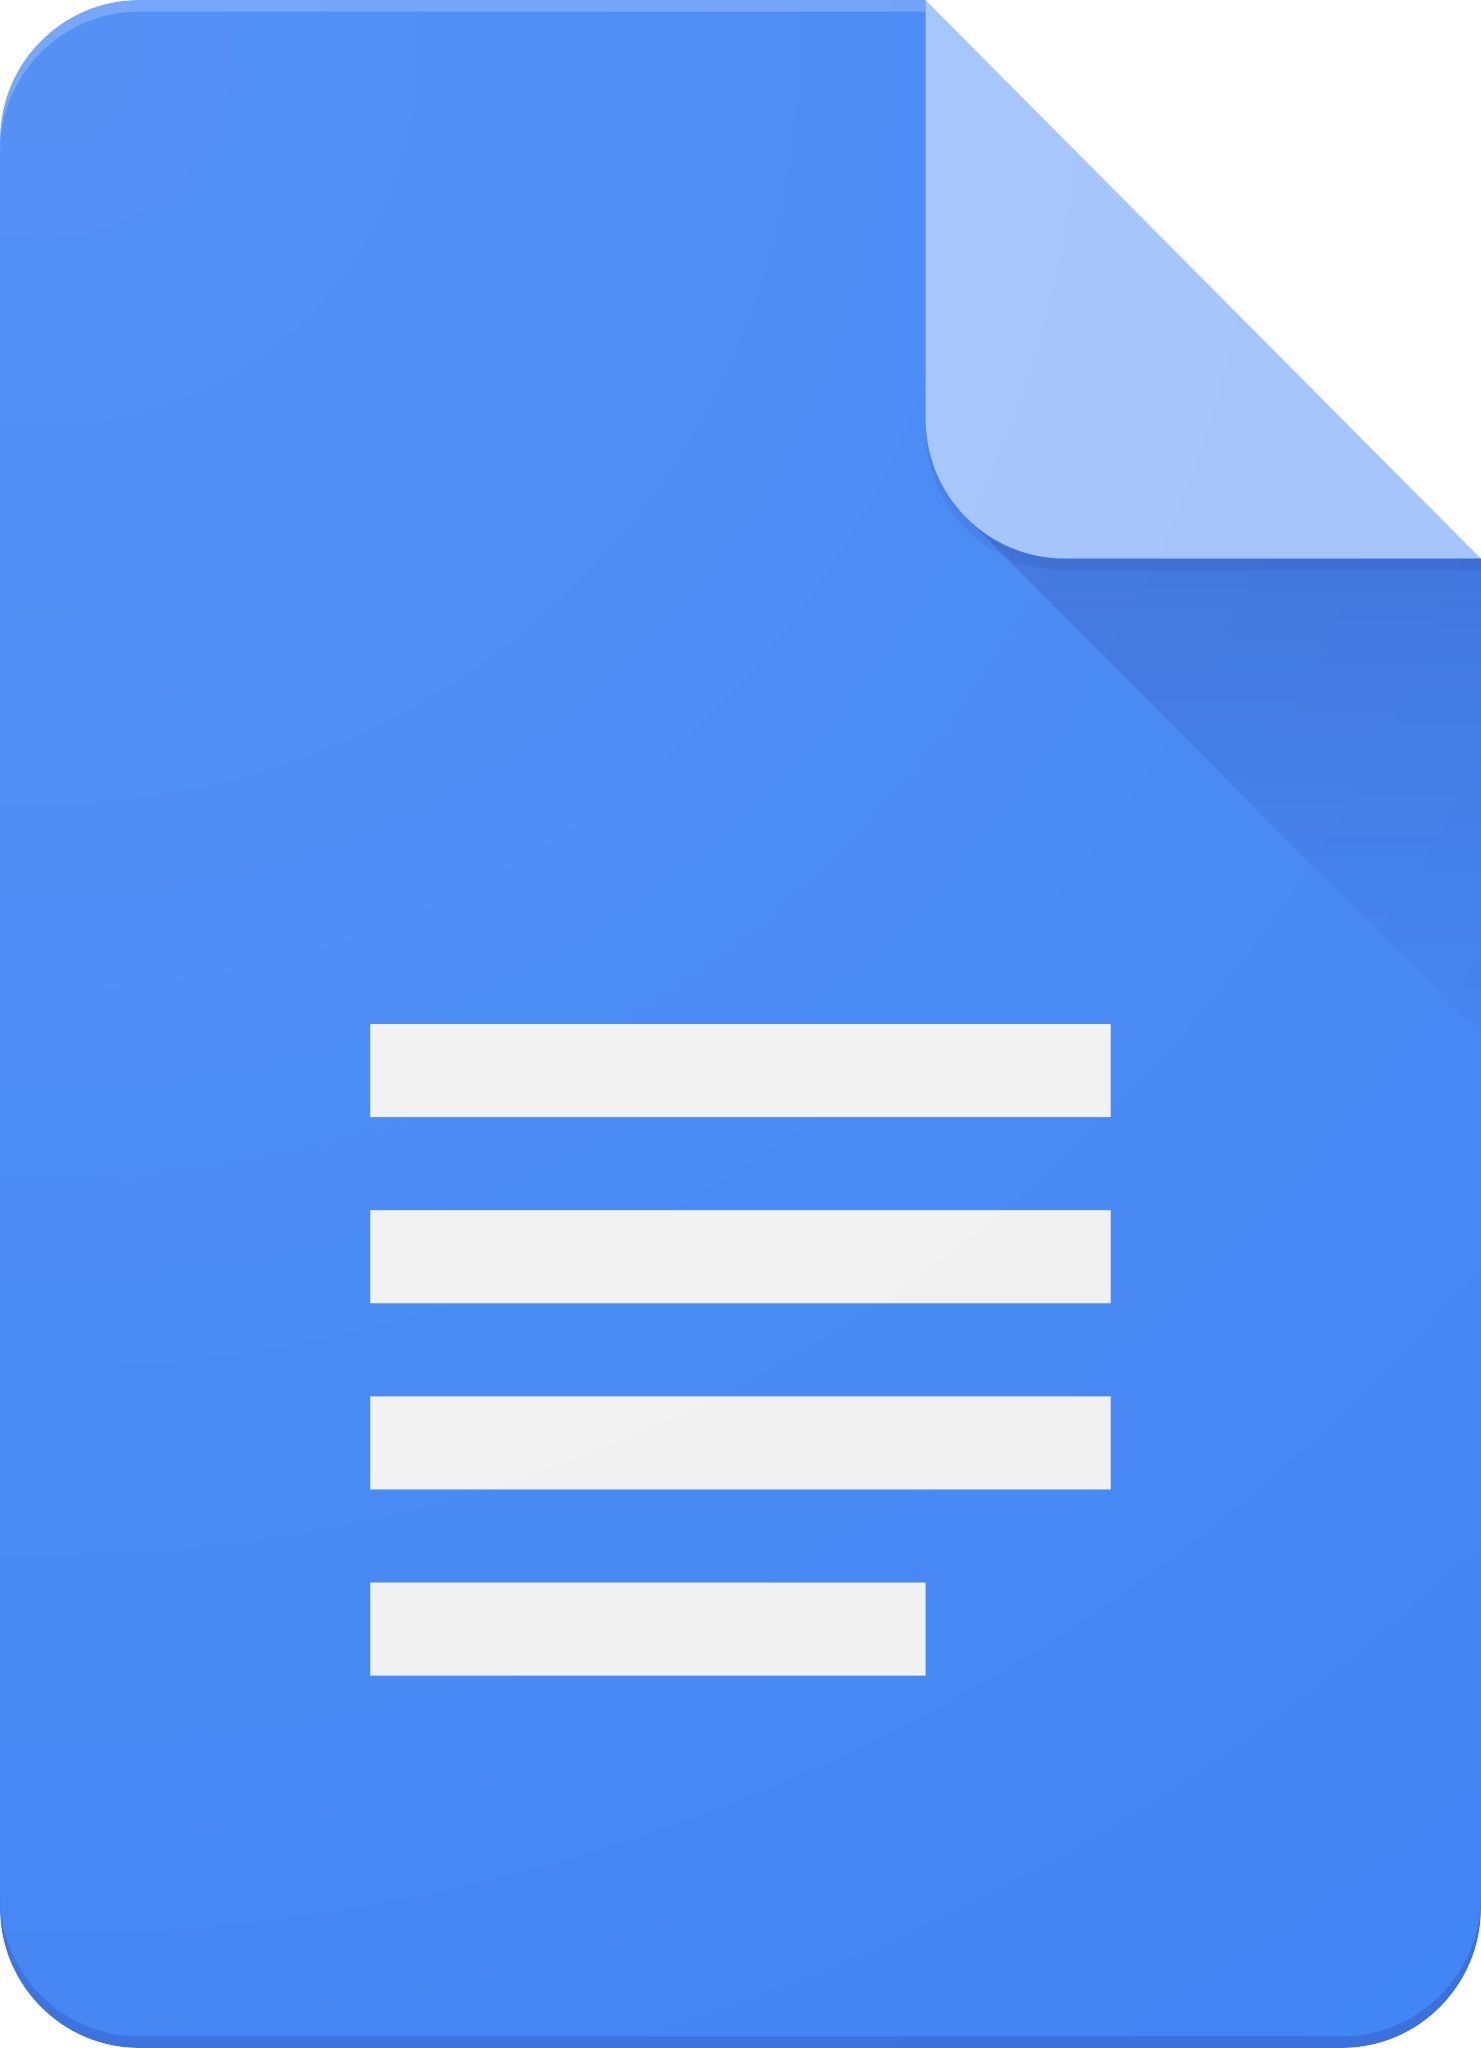 Google Docs logo, the word processing software by Google.